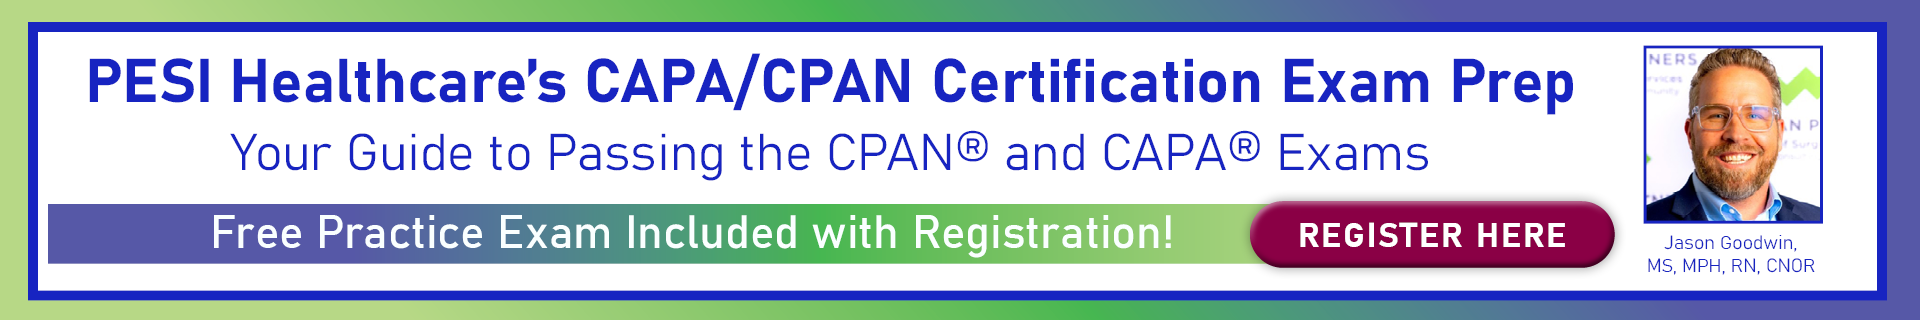 PESI Healthcare’s CAPA/CPAN Certification Exam Prep: Your Guide to Passing the CAPA® & CPAN® Exams